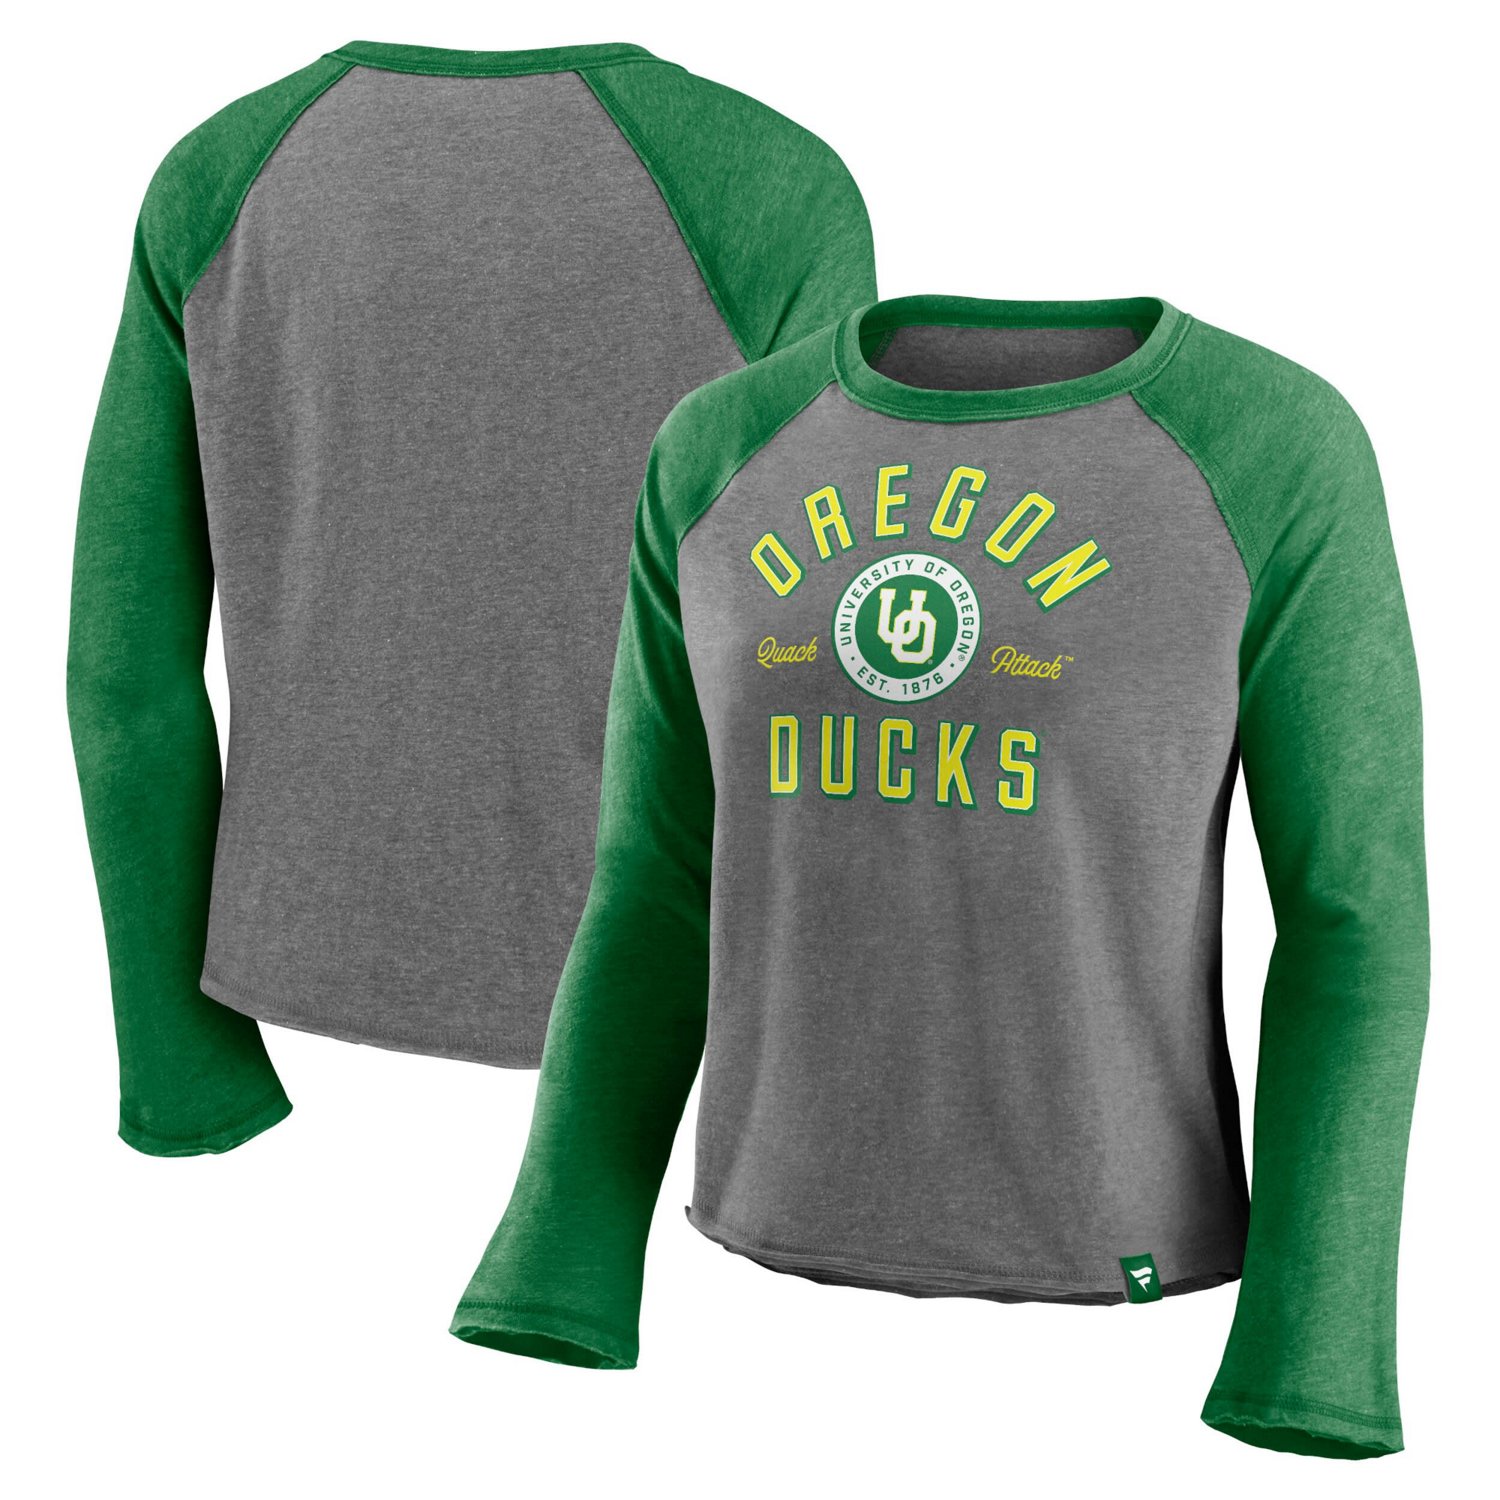 Majestic Heathered Gray/Heathered Oregon Ducks Competitive Edge Cropped Raglan Long Sleeve T-Shirt                               - view number 1 selected